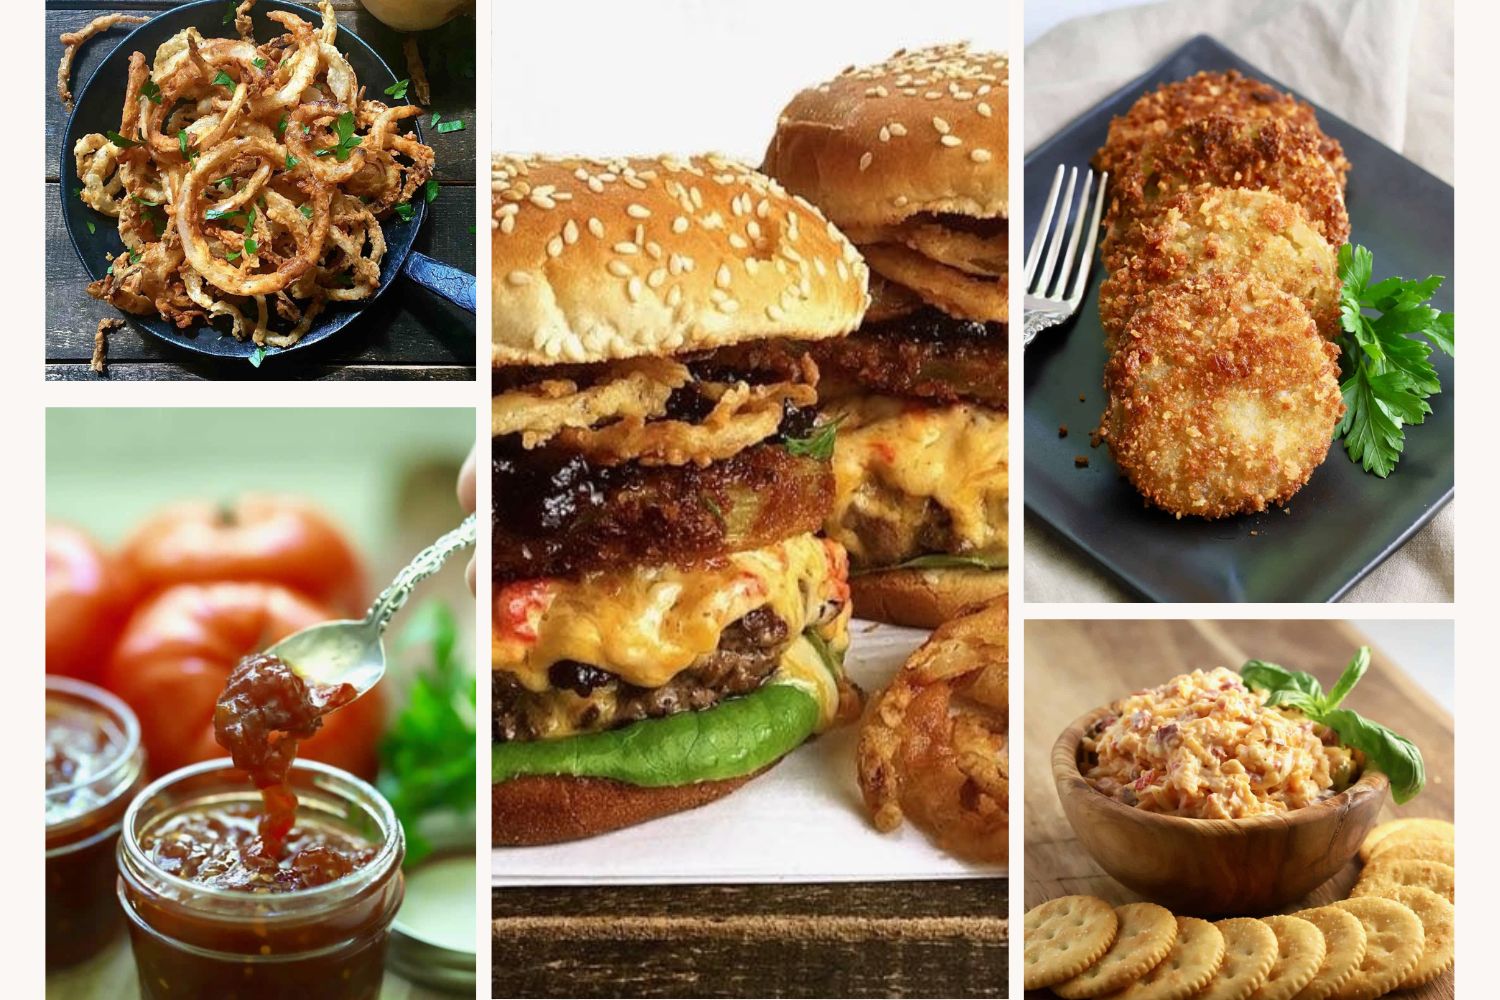 Try This Ultimate Southern Burger Including Recipes to the Special Toppings